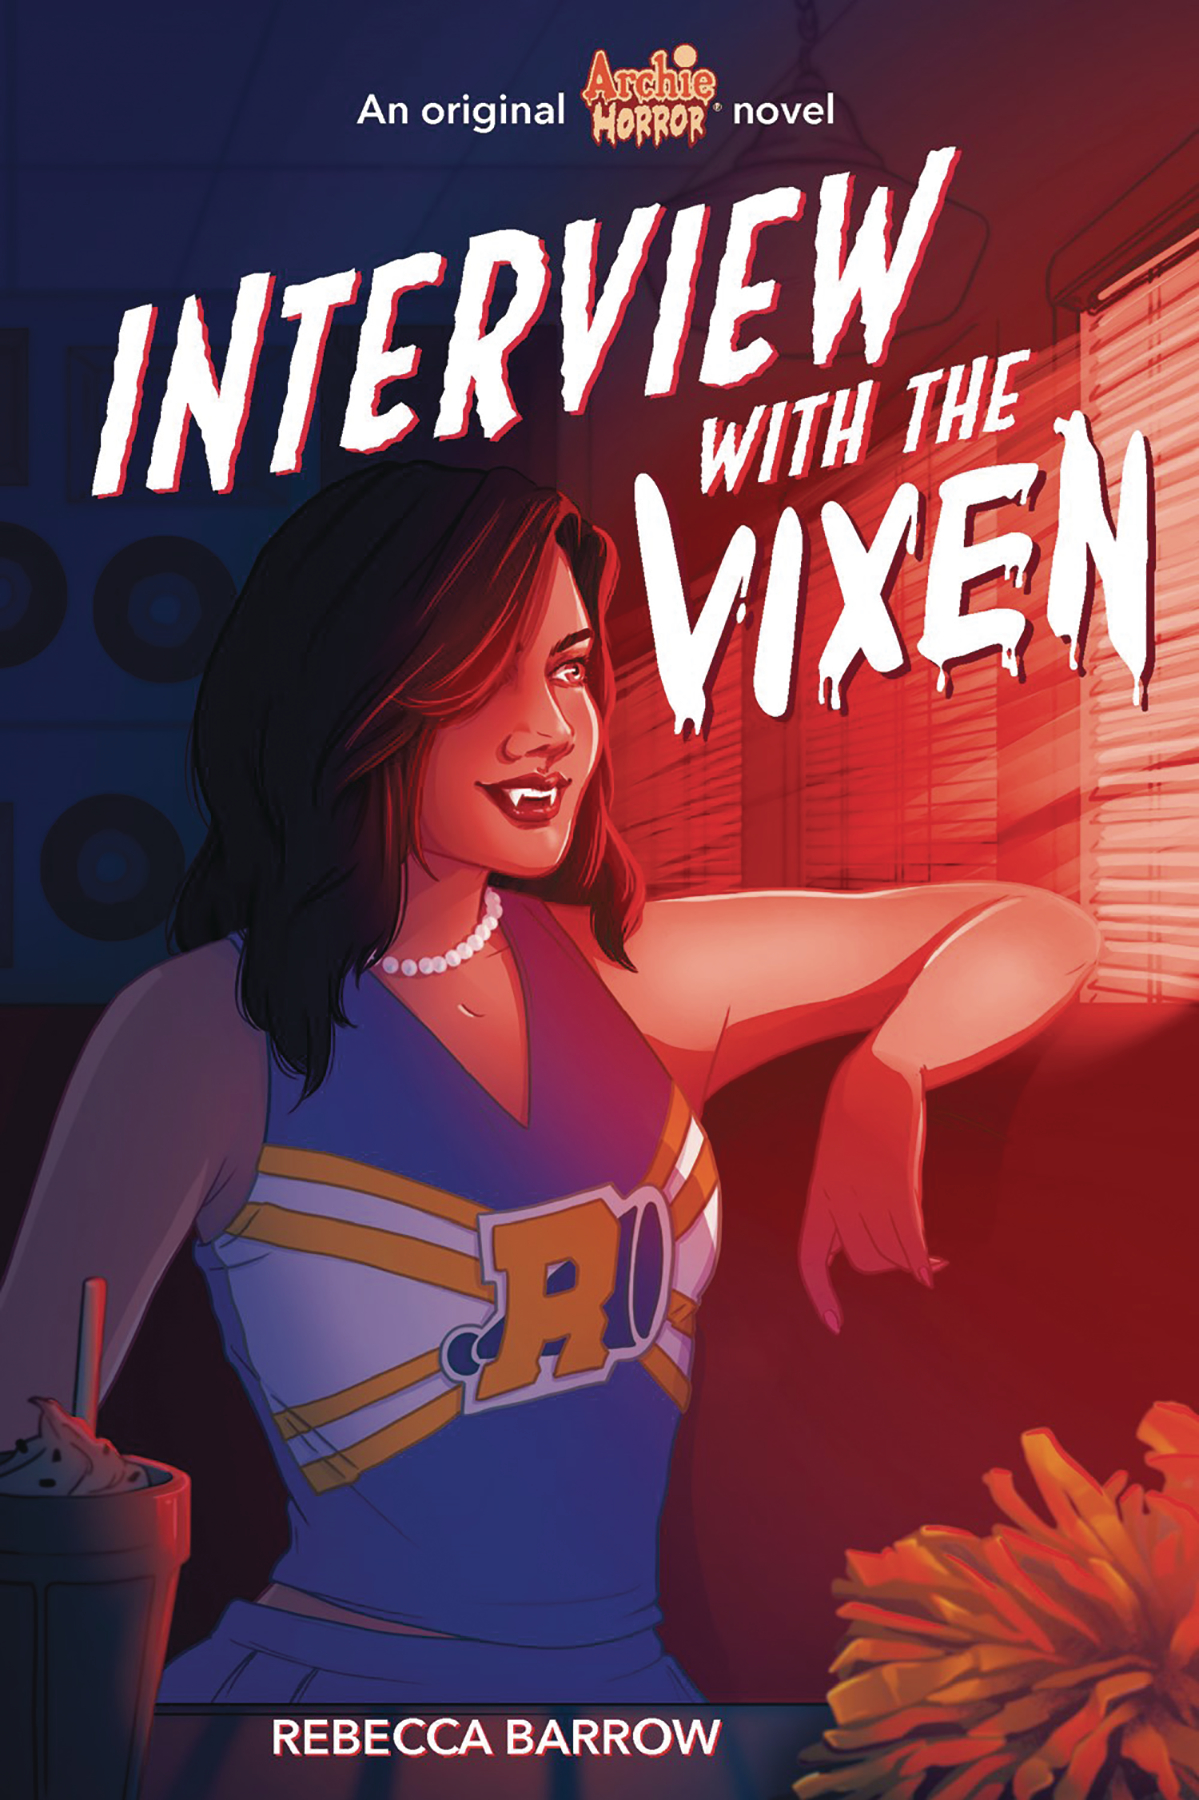 Archie Horror Novel Soft Cover Volume 2 Interview With Vixen